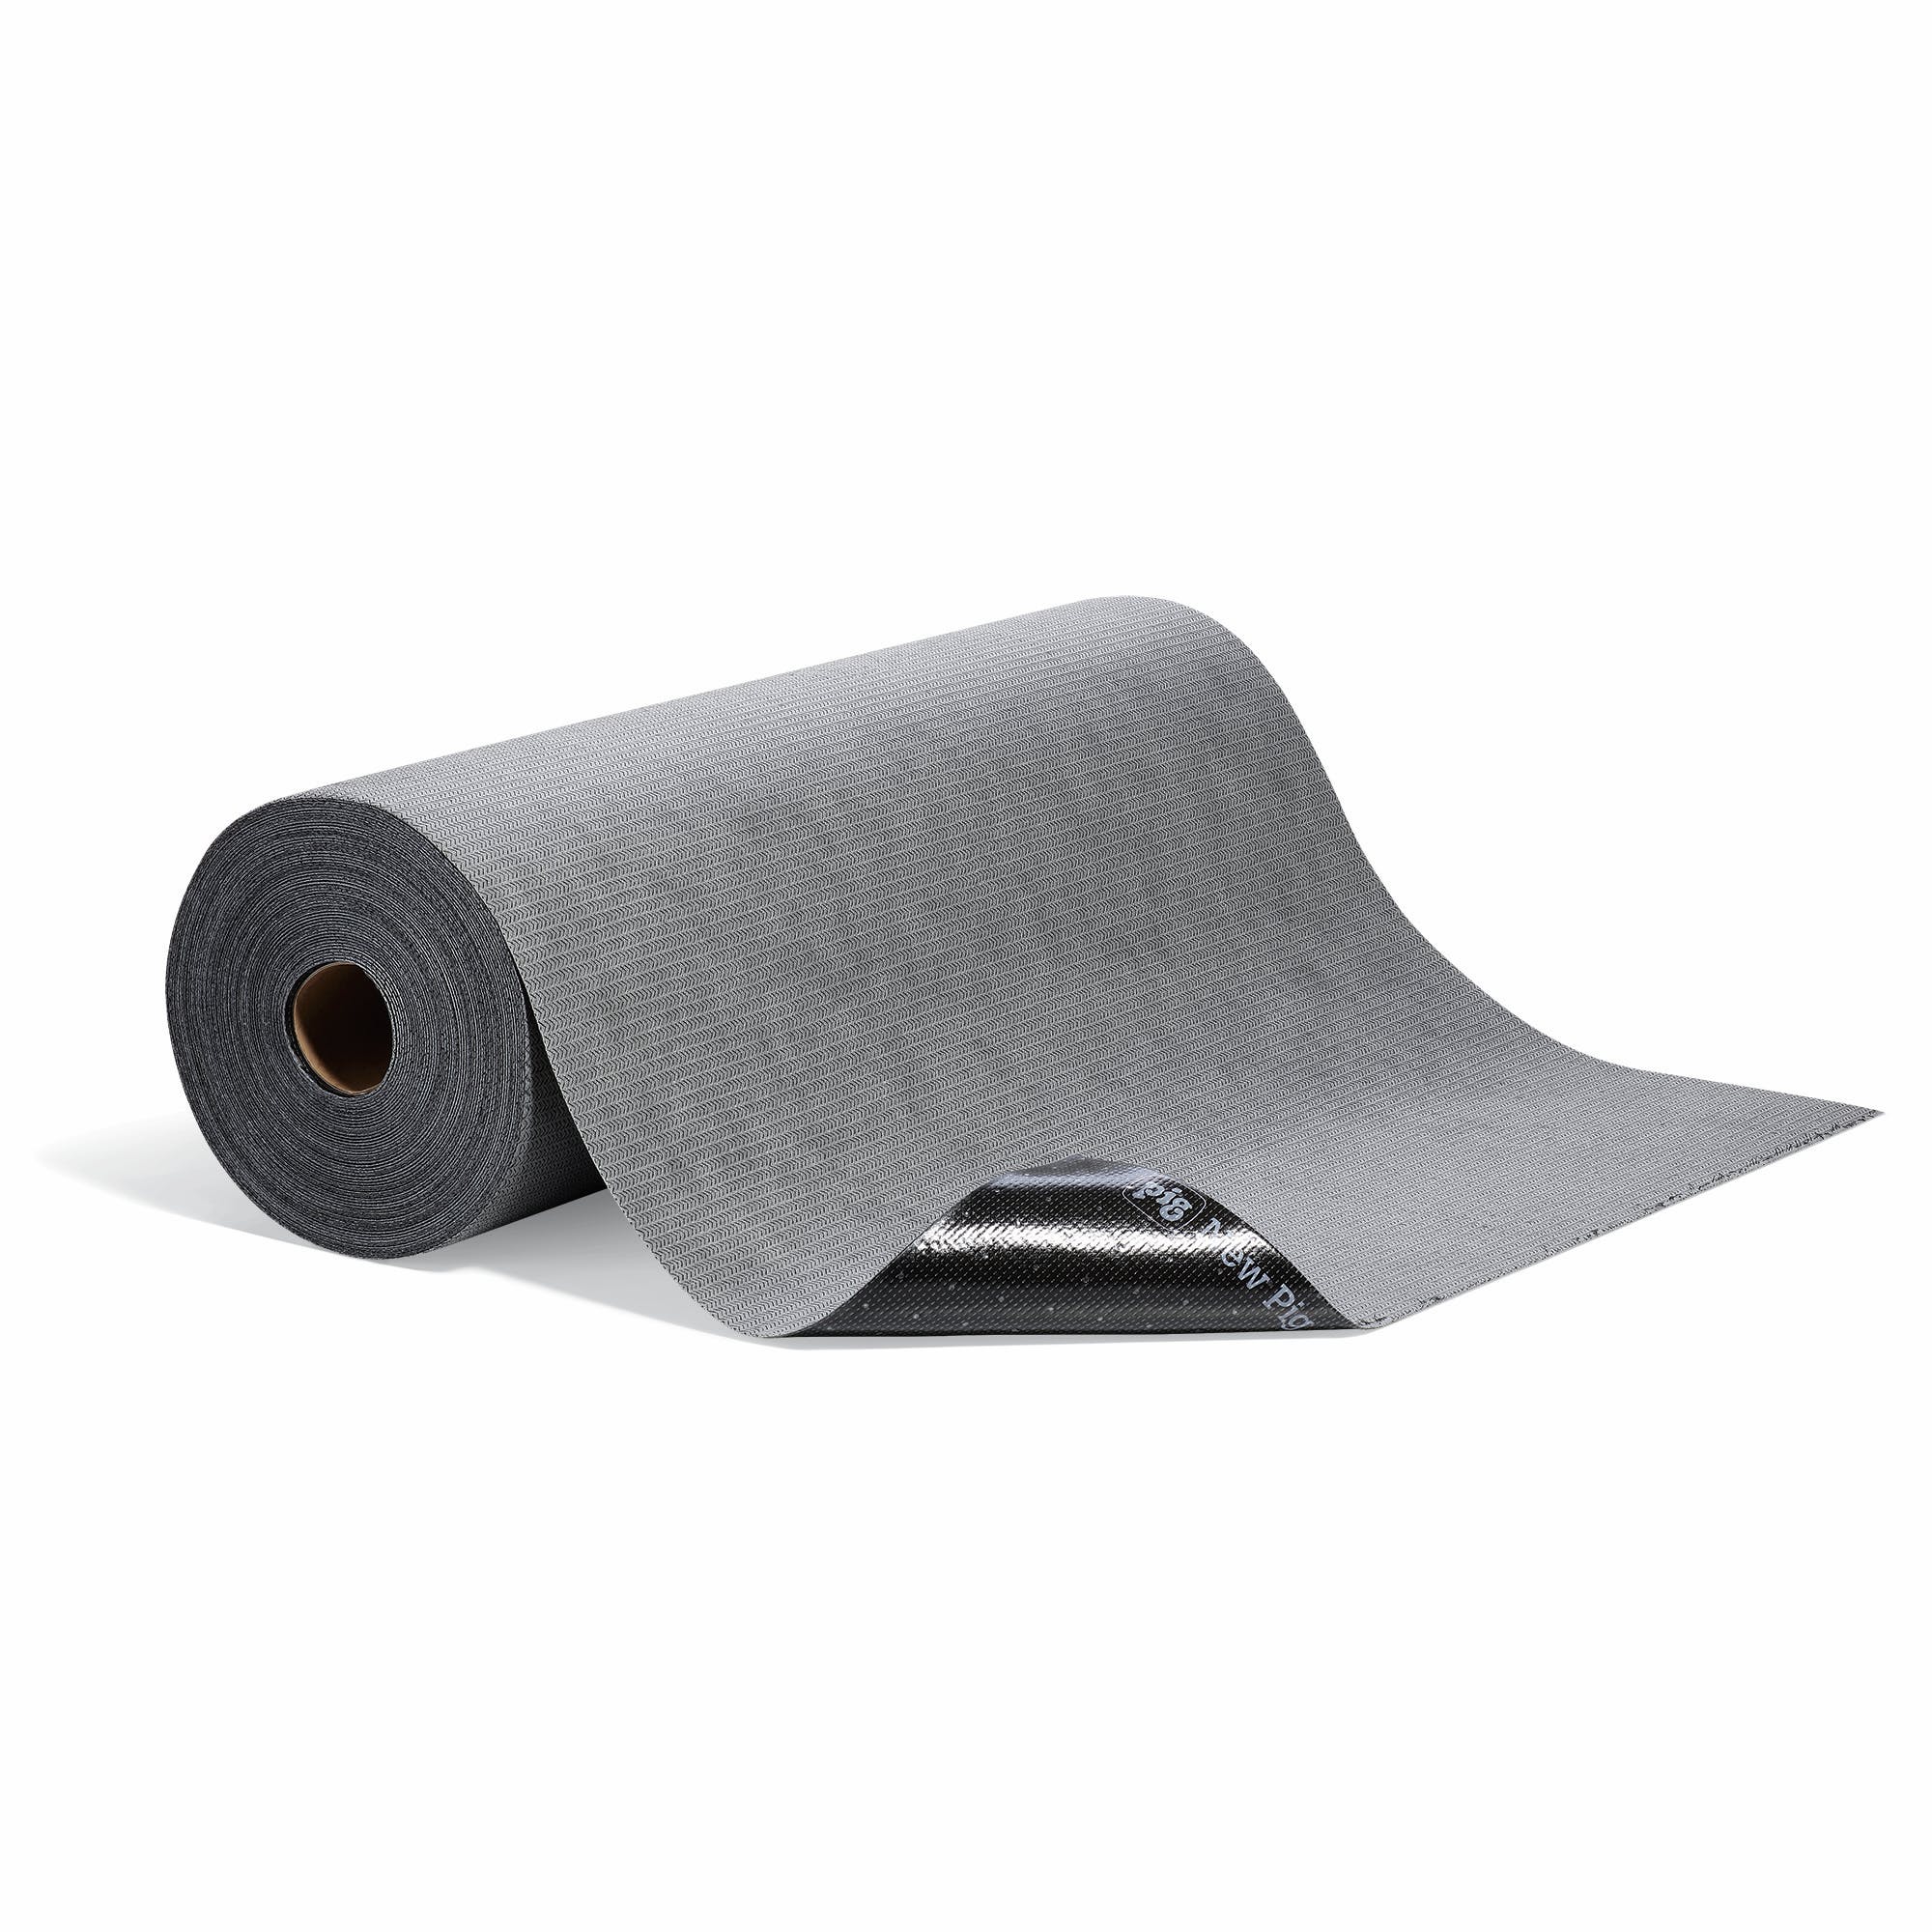 New Pig Corporation MAT32350-GY PIG Paint Booth Mat with Adhesive Backing - 32 in. X 150 ft. gray